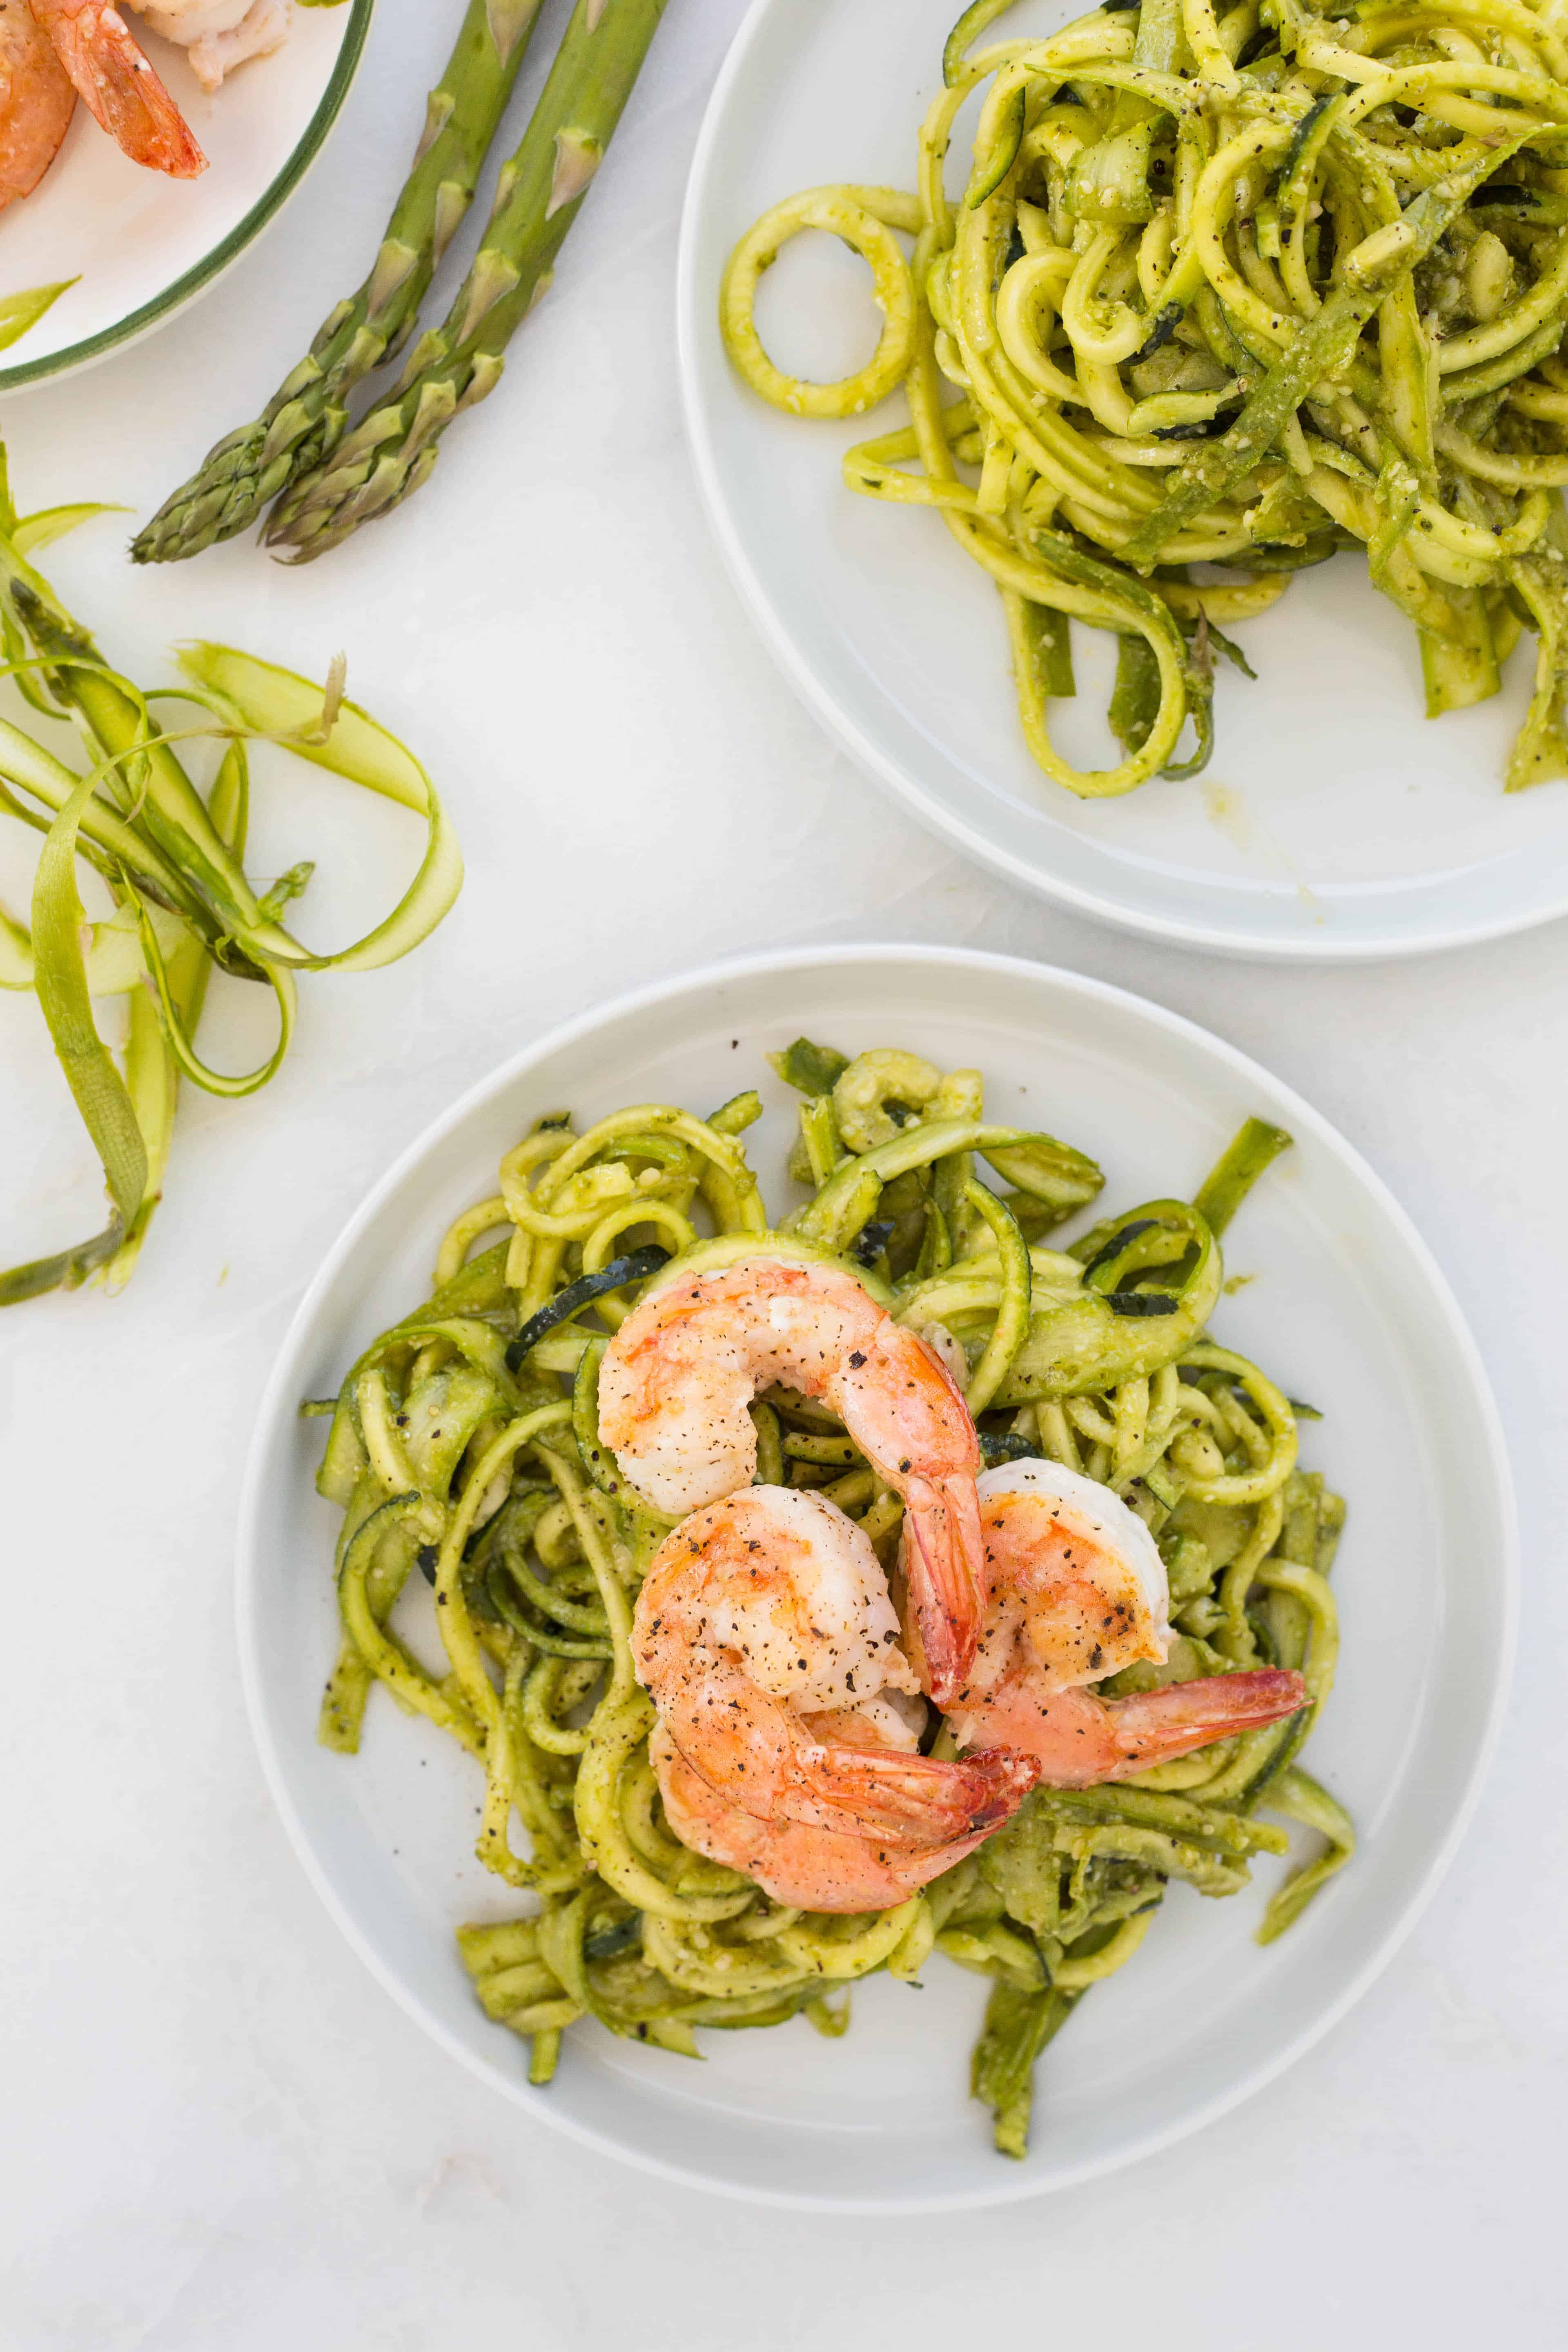 Pesto Zucchini Noodles with Shaved Asparagus and Shrimp